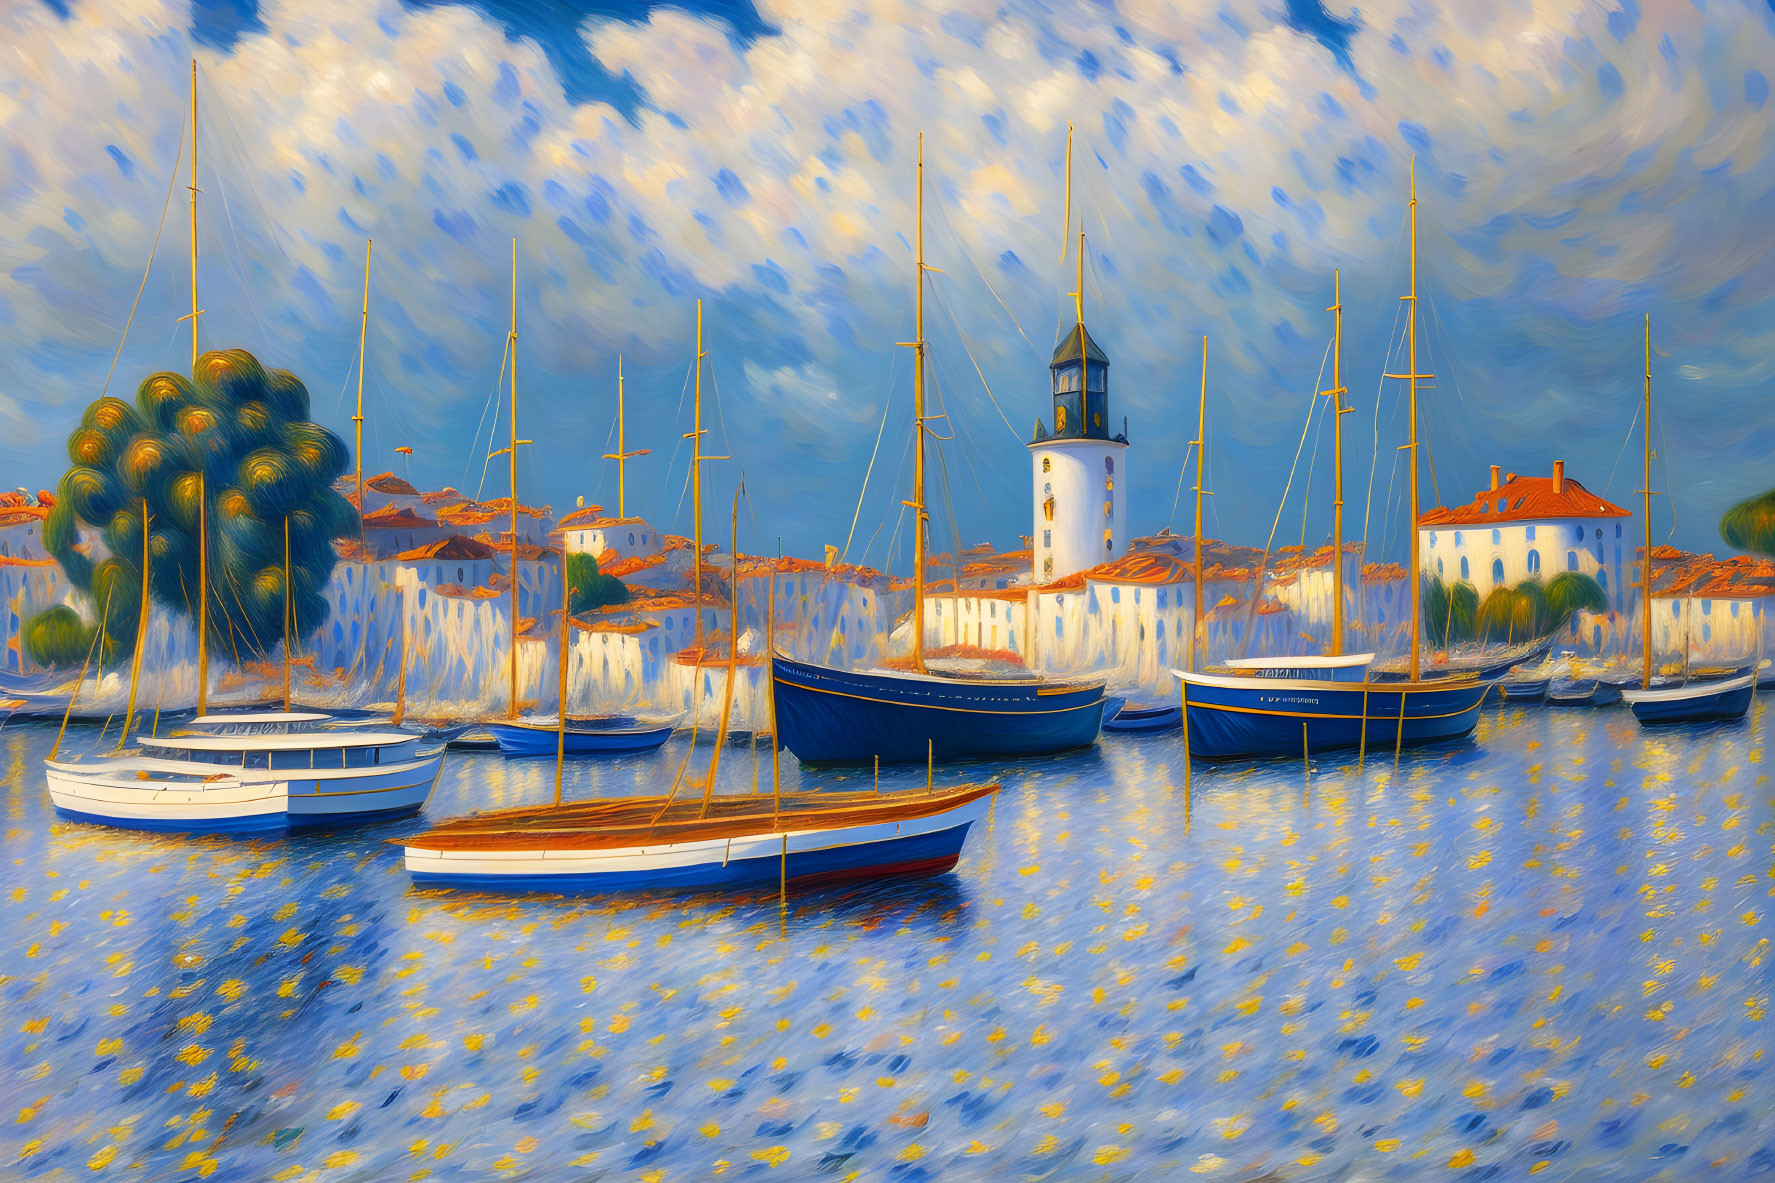 Harbor scene with boats, lighthouse, and impressionist sky